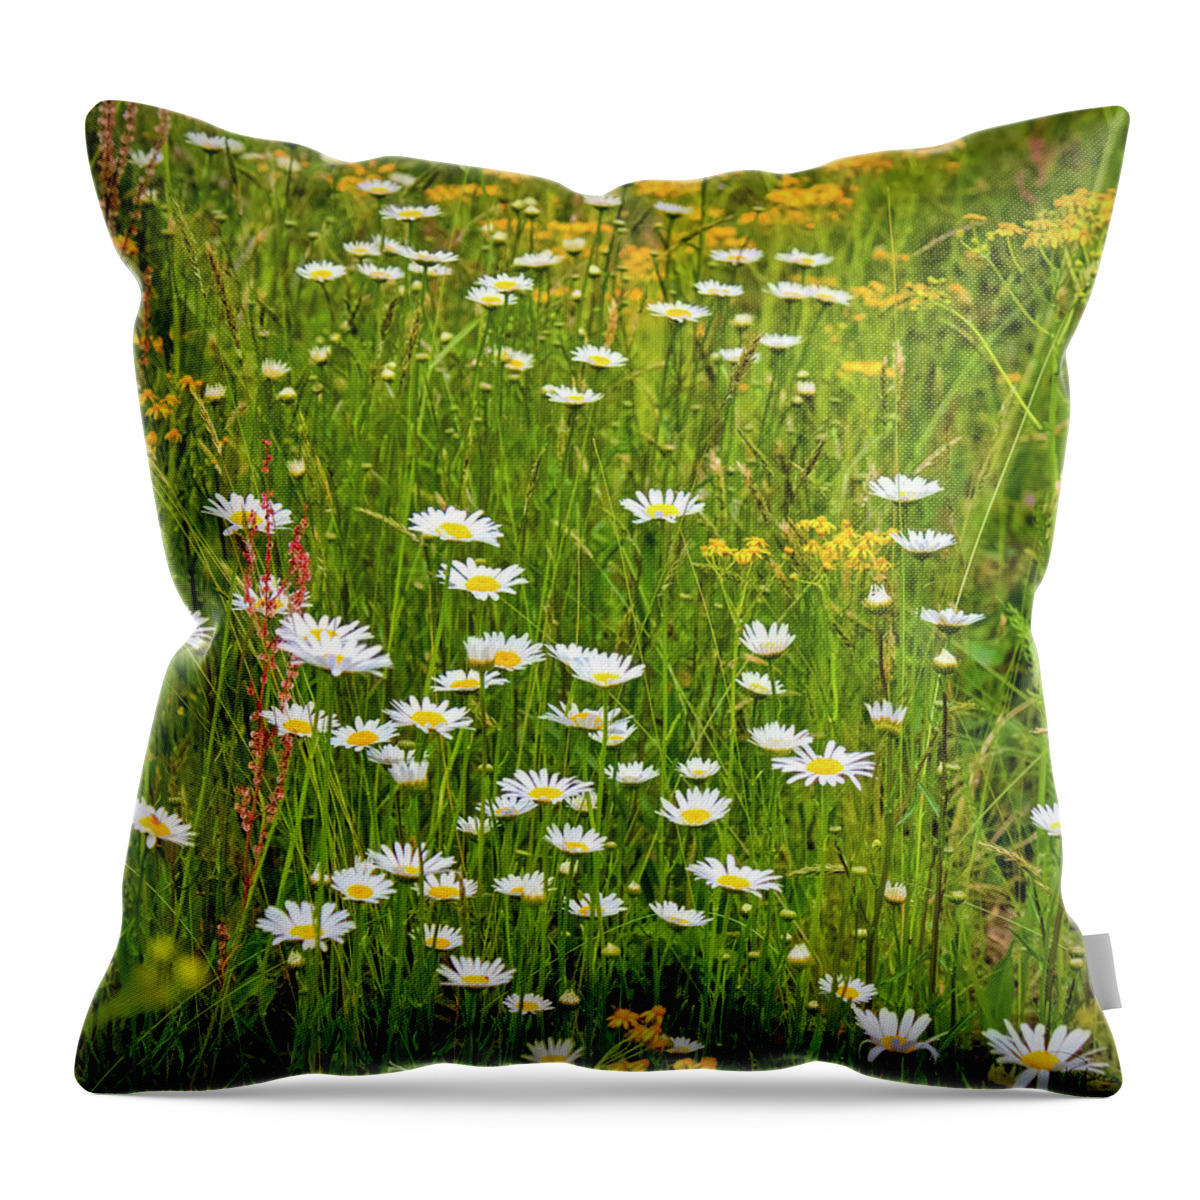 Wild Daisy River Throw Pillow featuring the photograph Wild Daisy River South Carolina by Bellesouth Studio